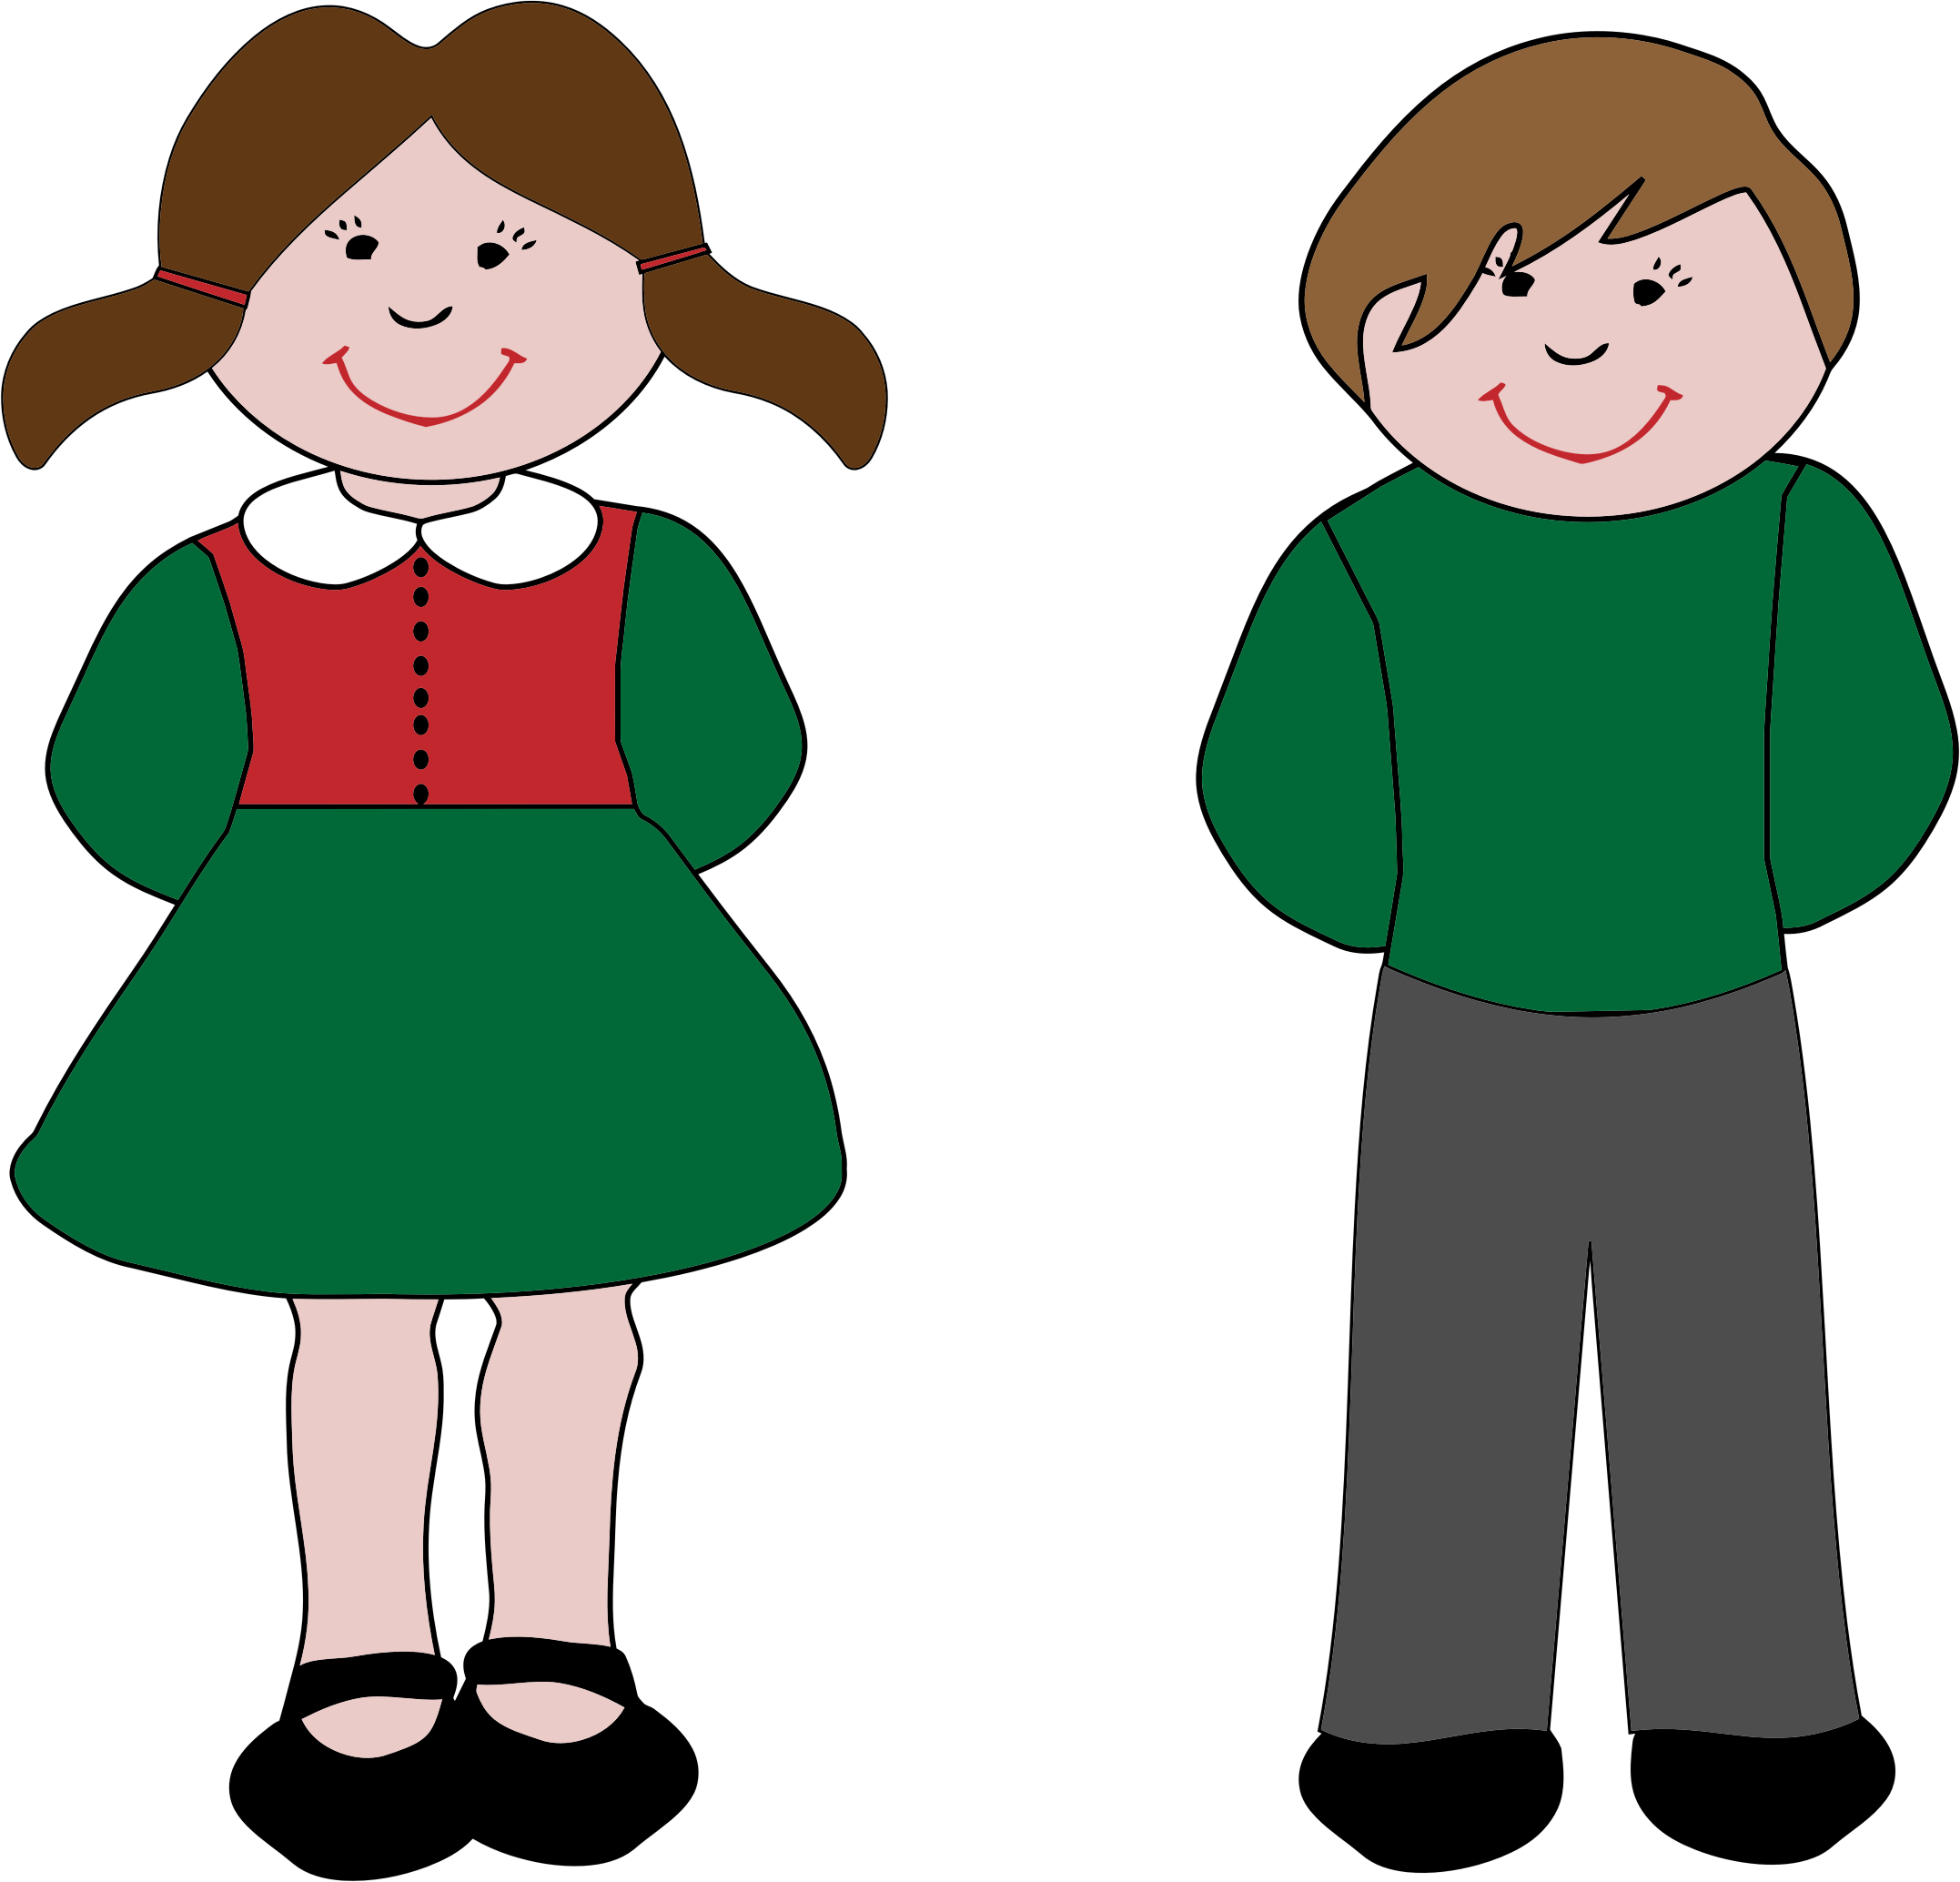 Boy and girl clipart png - ClipartFox